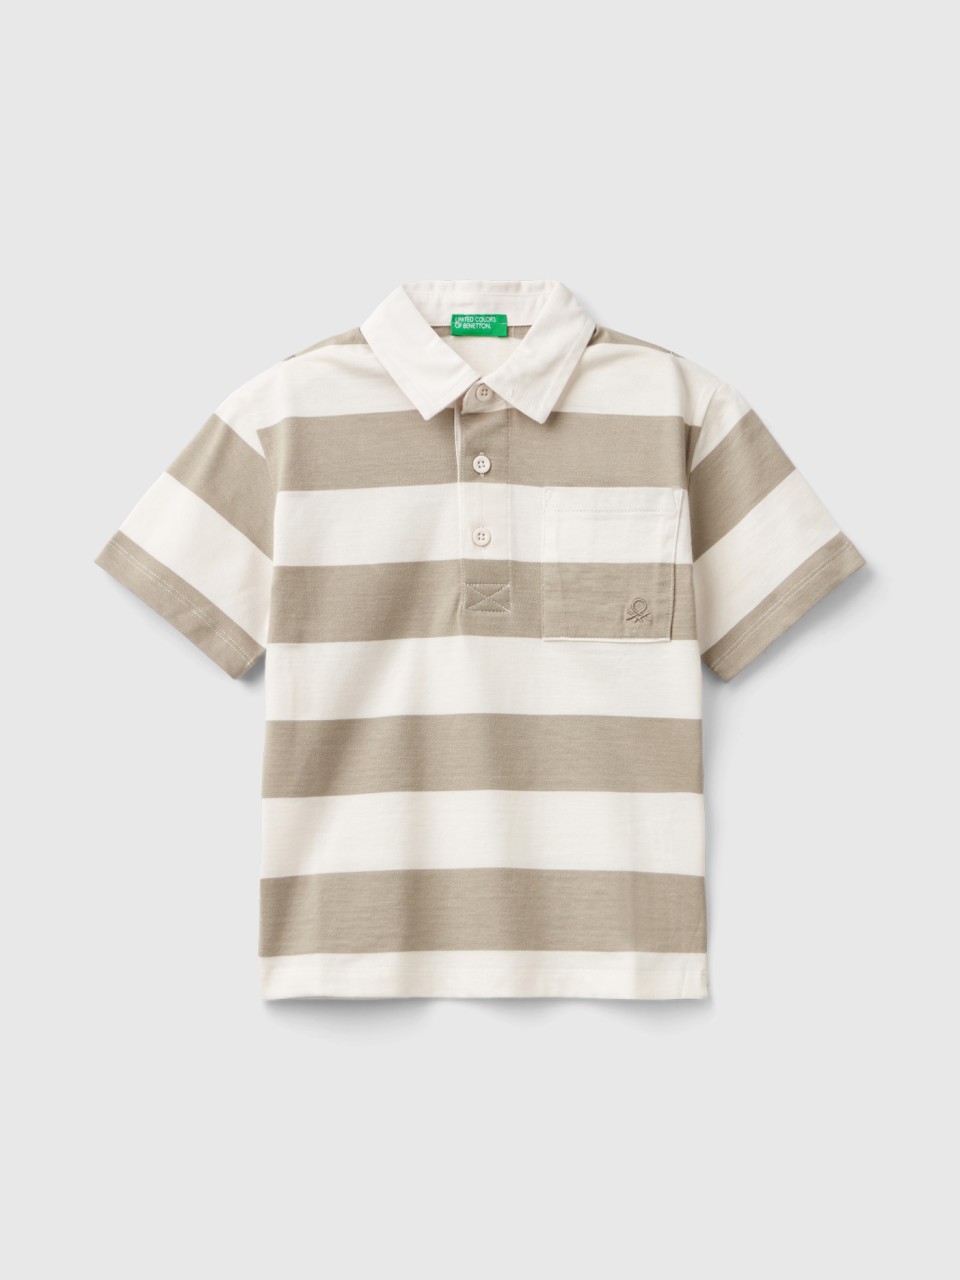 Benetton, Rugby Polo With Pocket, Dove Gray, Kids